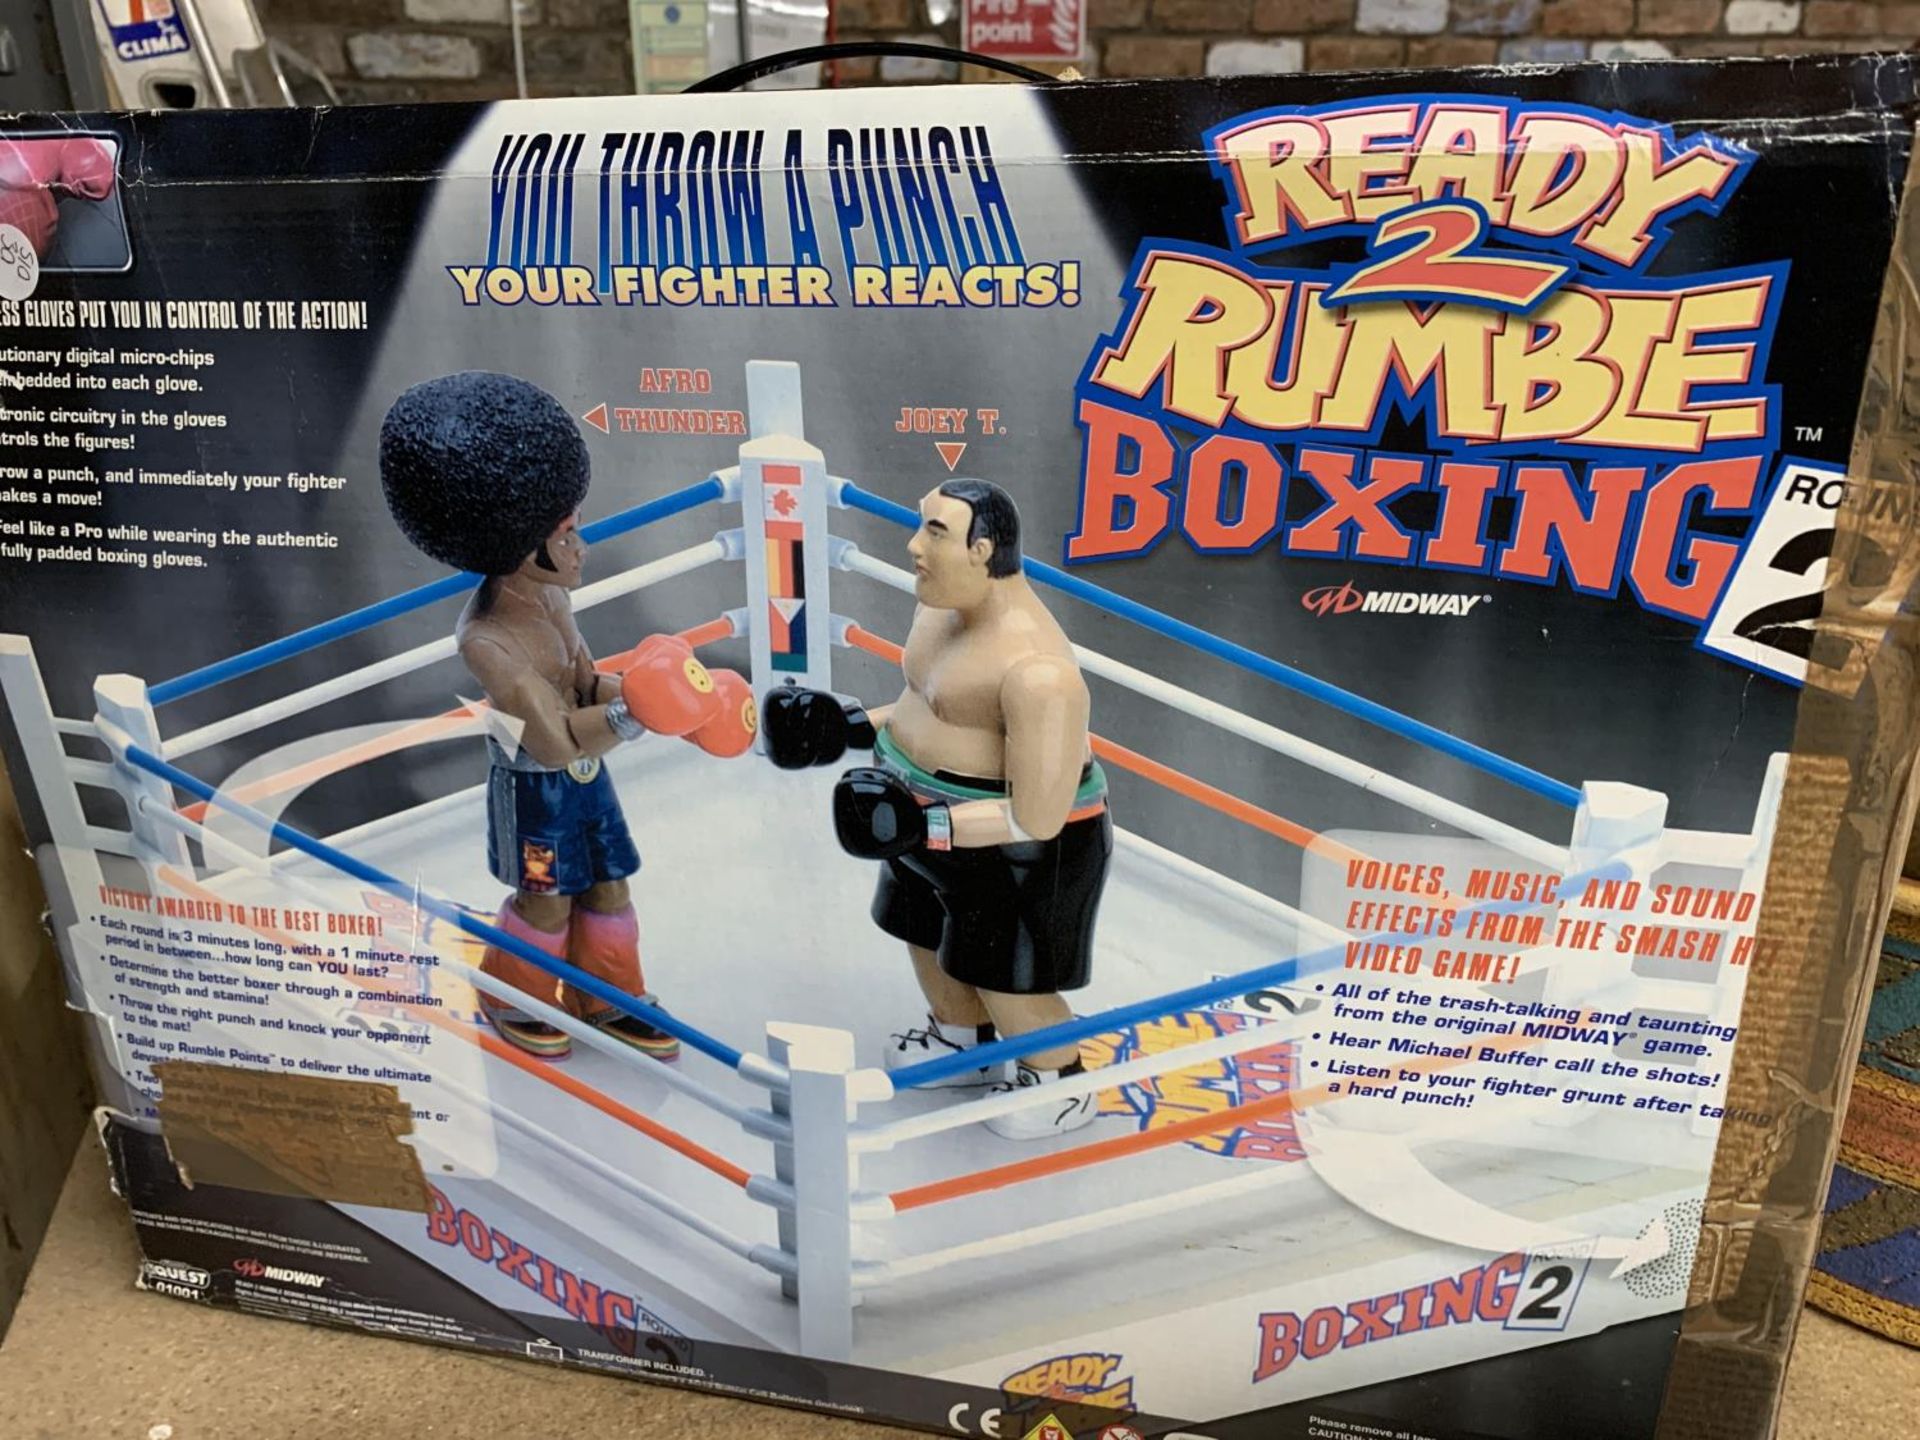 A BOXED WIRELESS 'READY 2 RUMBLE' BOXING SET - Image 2 of 2